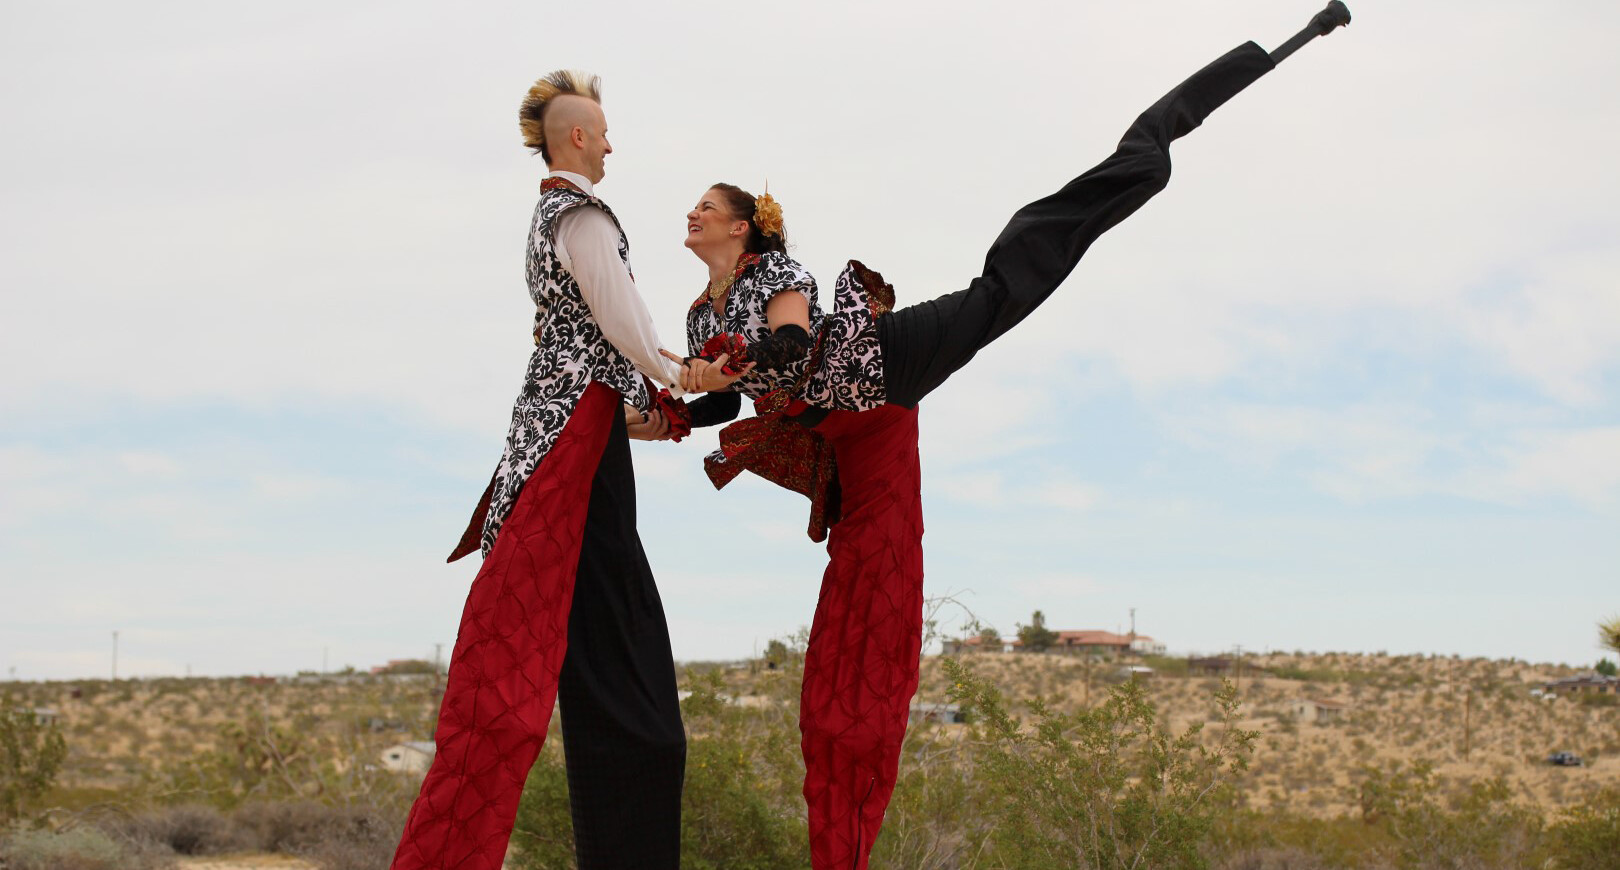 A light skinned man and a woman dance together on stilts. Both wear black and white patterned brocade waistcoats with pants that have one black eg and one red